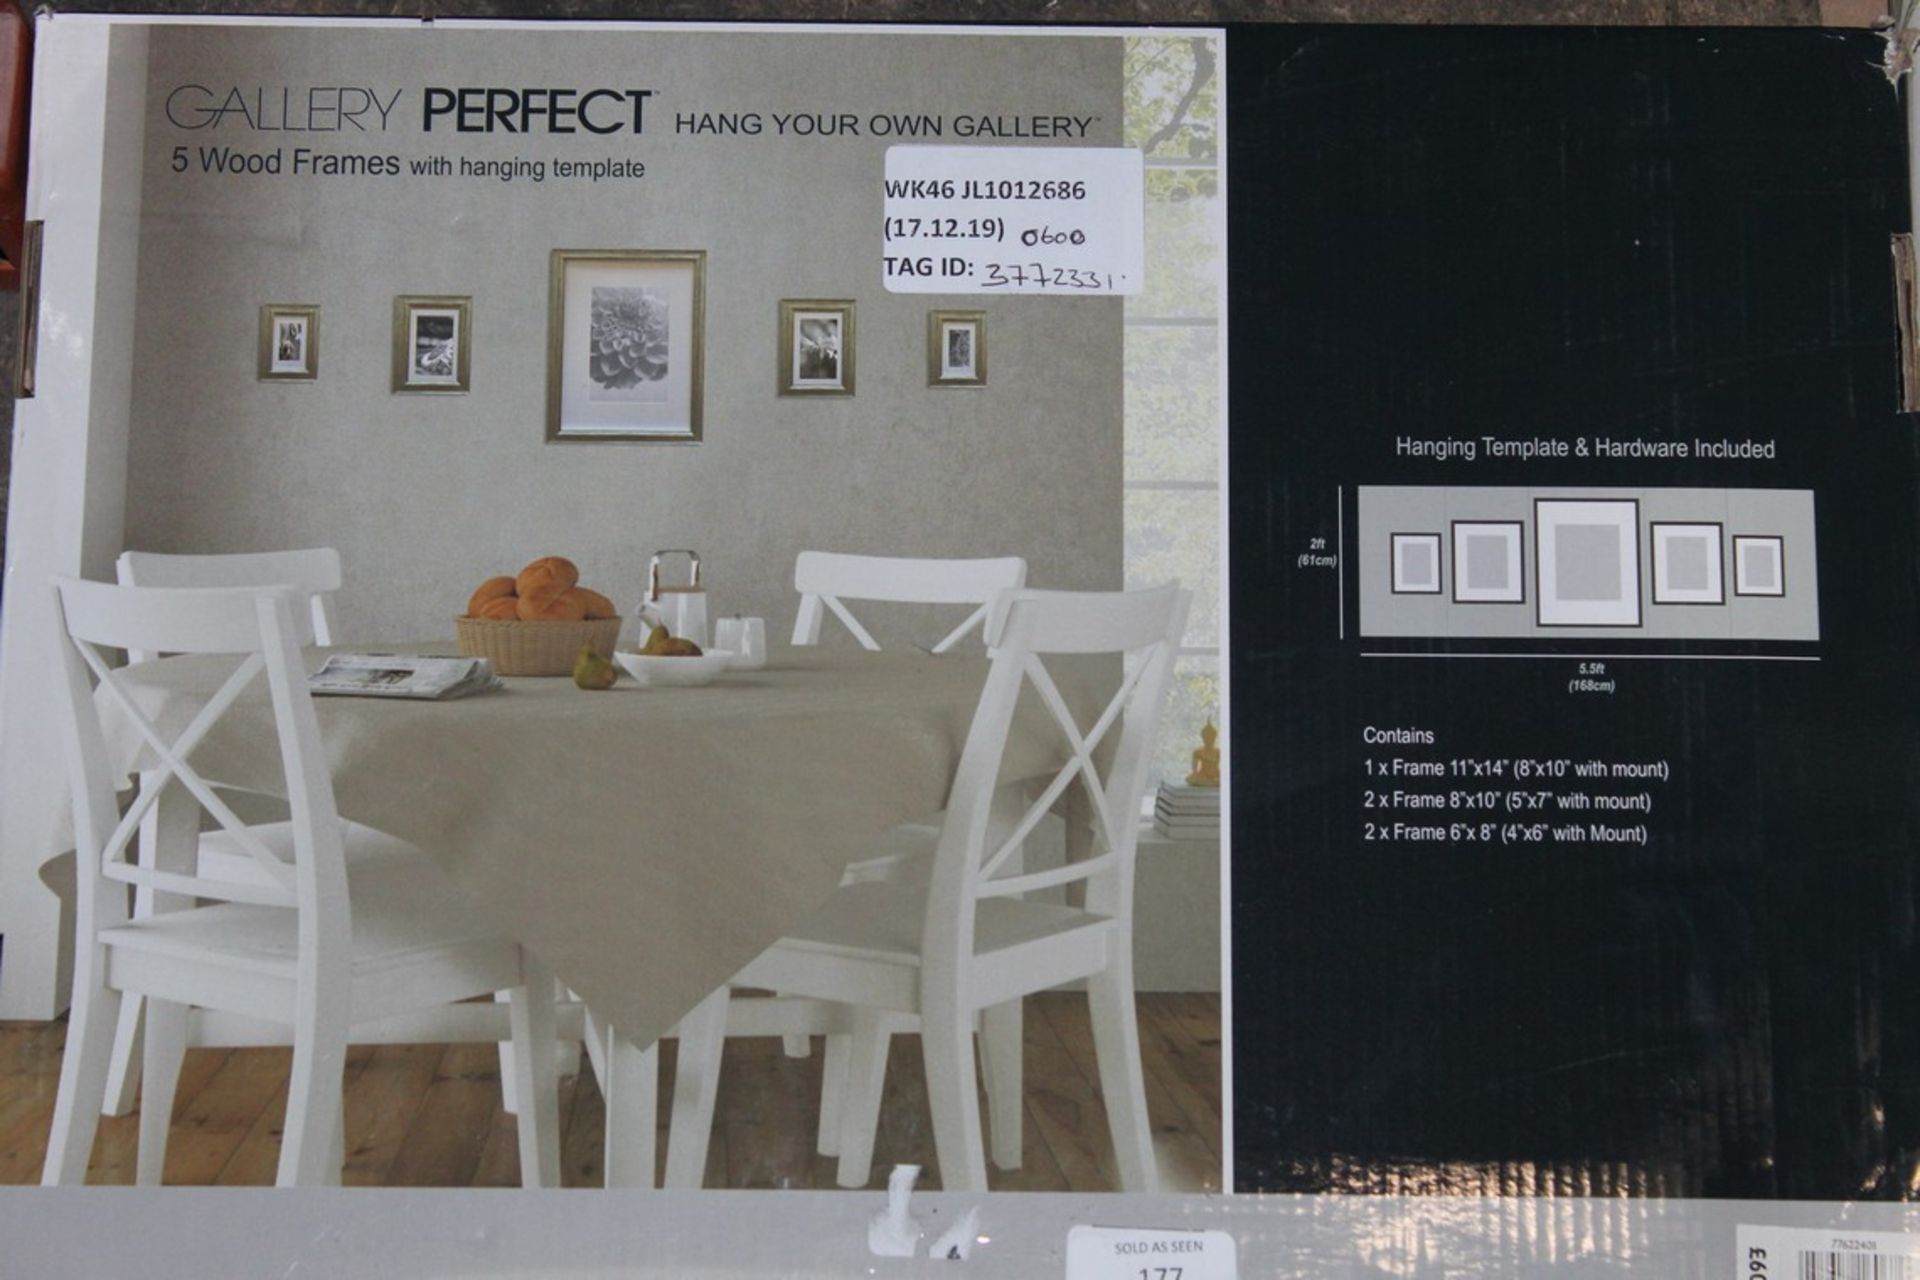 Boxed Gallery Perfect Set of 5 Hang Your Own Wooden Picture Frames RRP £60 (3776331) (Public Viewing